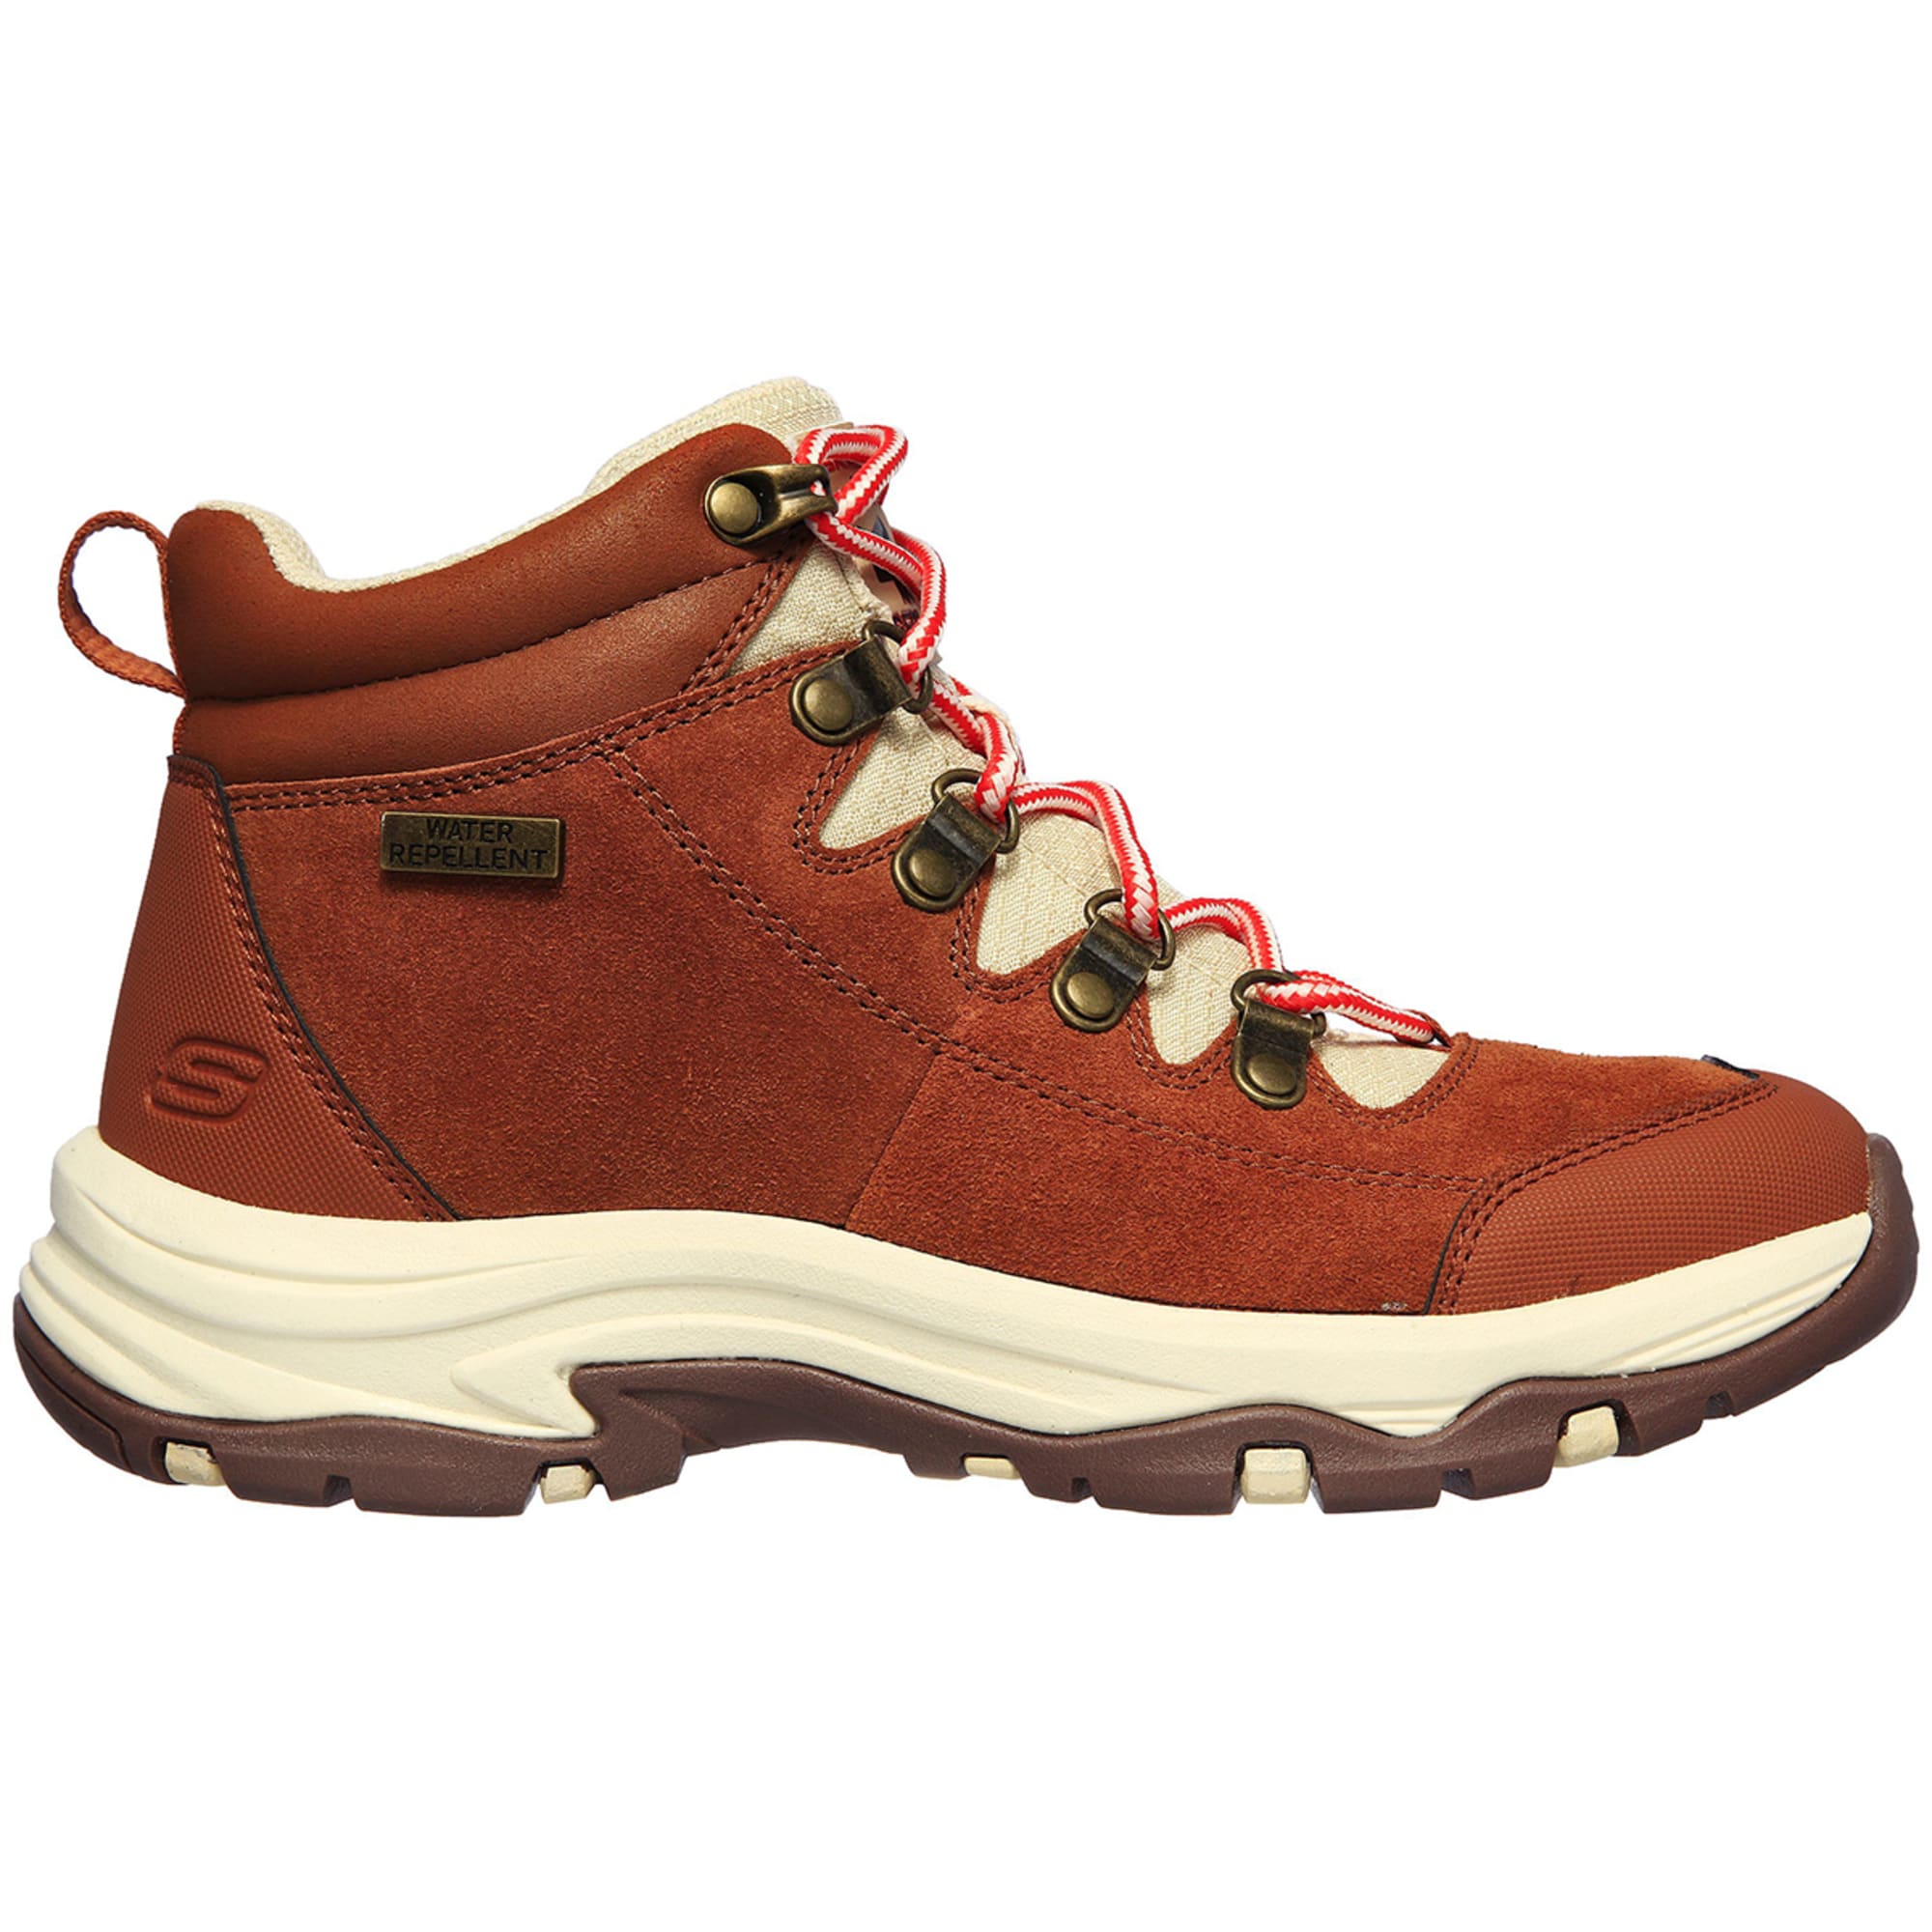 SKECHERS Women's Relaxed Fit: Trego - El Capitan Hiking Boots